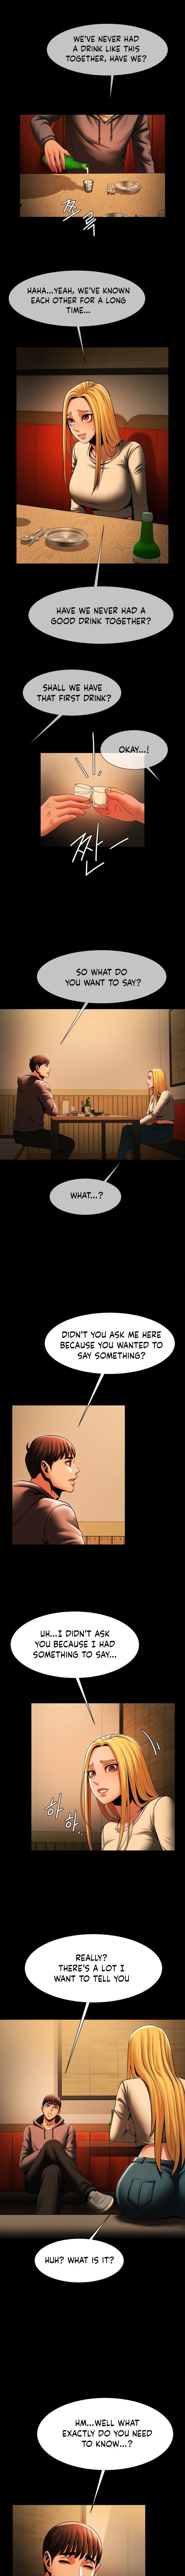 Under the Radar - Chapter 7 Page 9